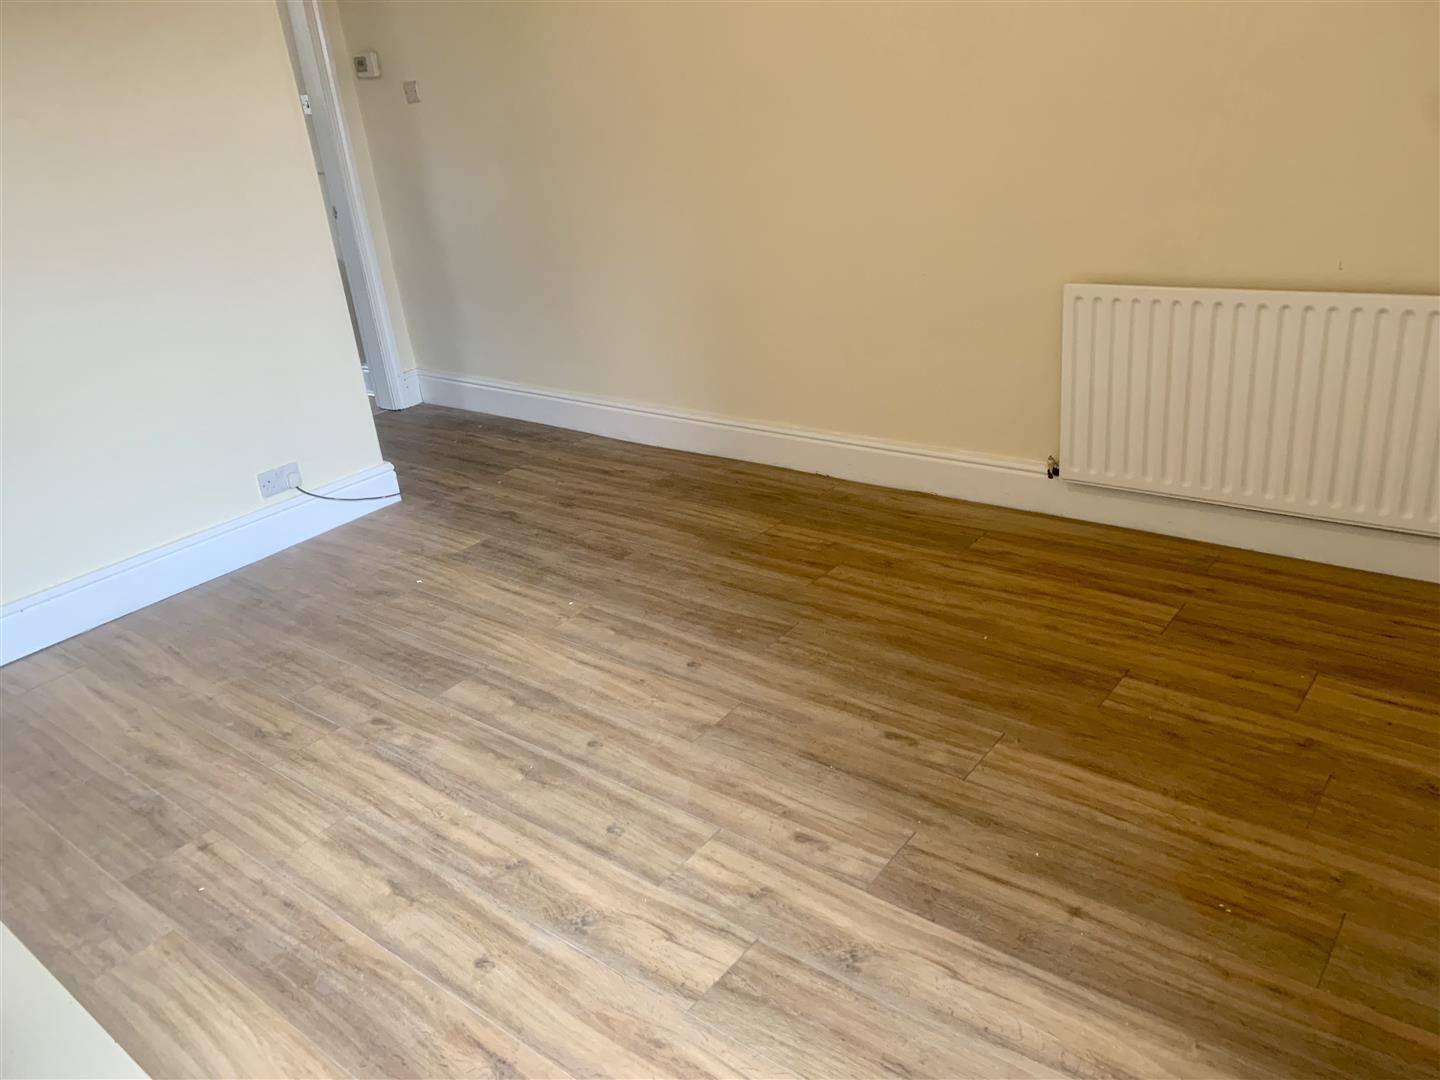 2 bed  to rent in Ilkeston  - Property Image 7